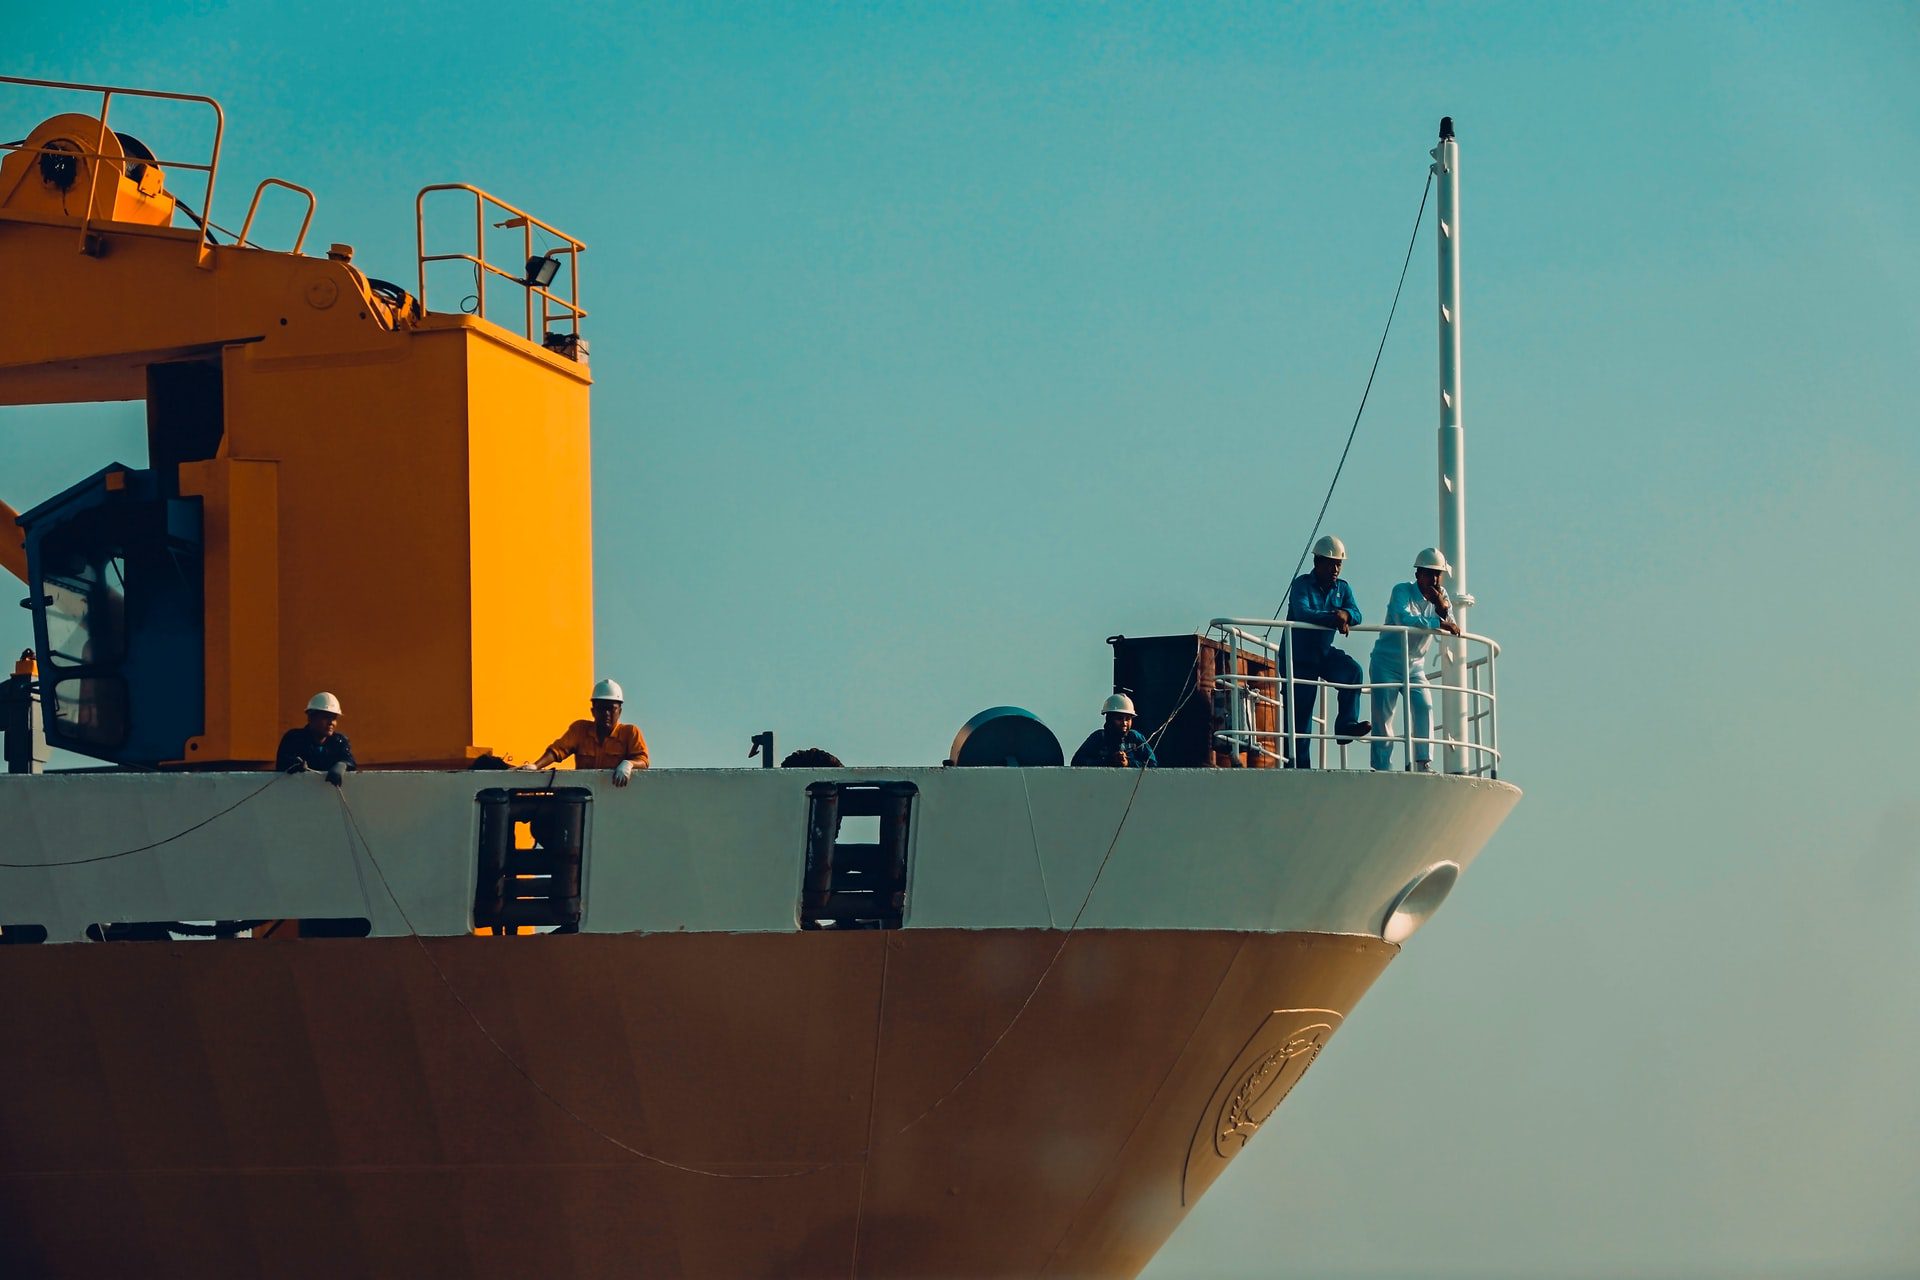 Shipping companies face complex travel logistics when changing crews.